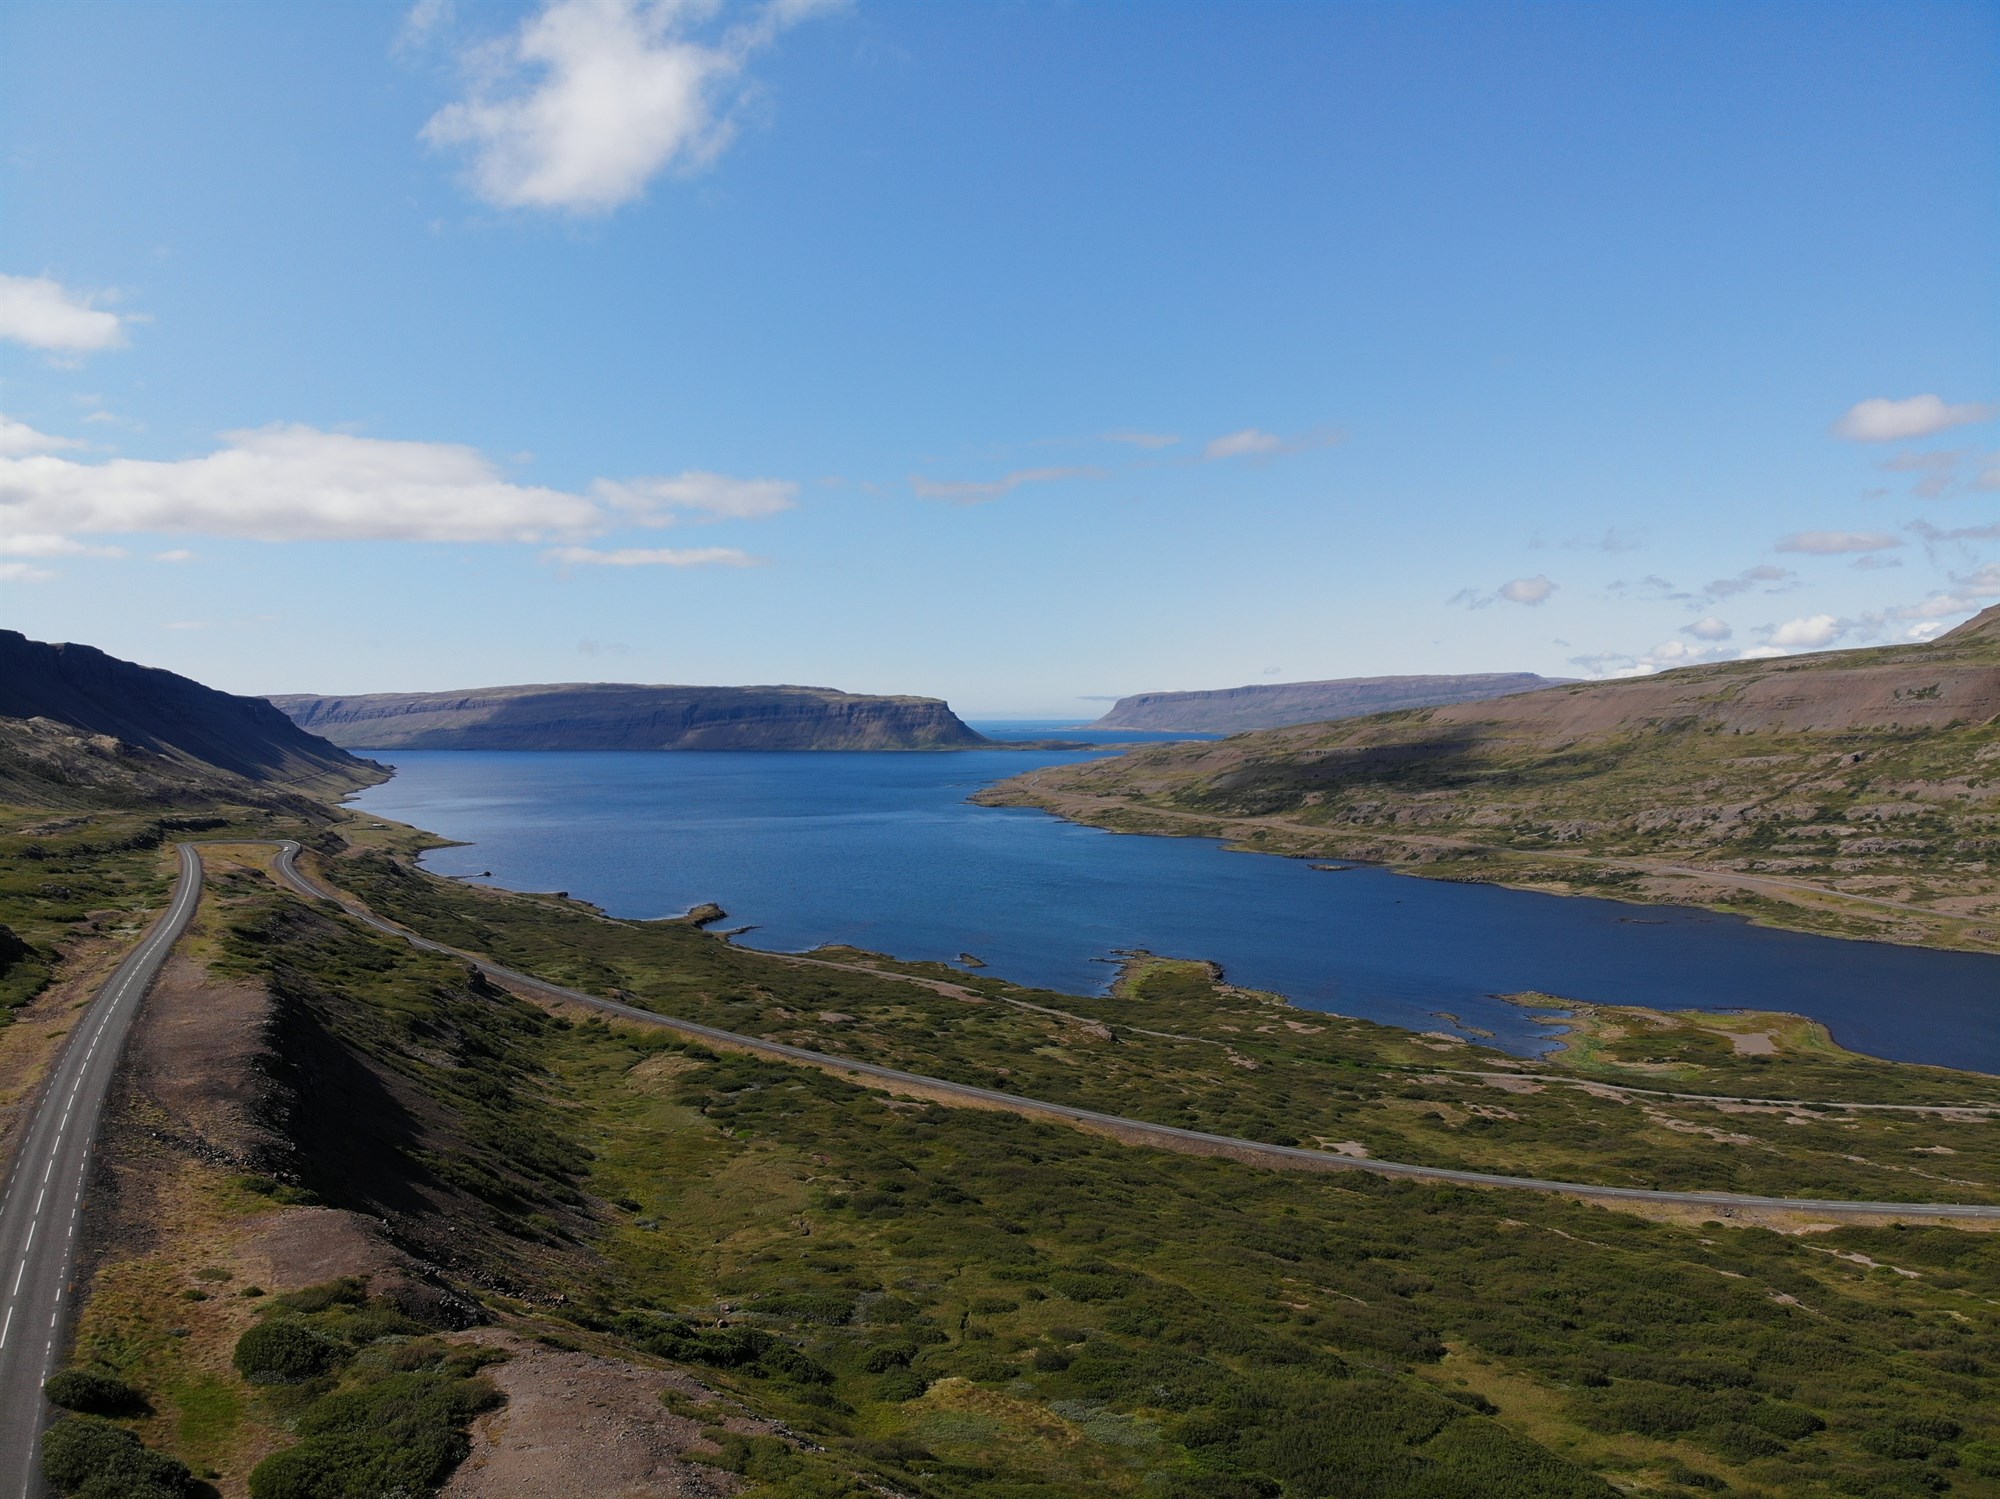 View over a winding road in the Westfjords, Iceland.